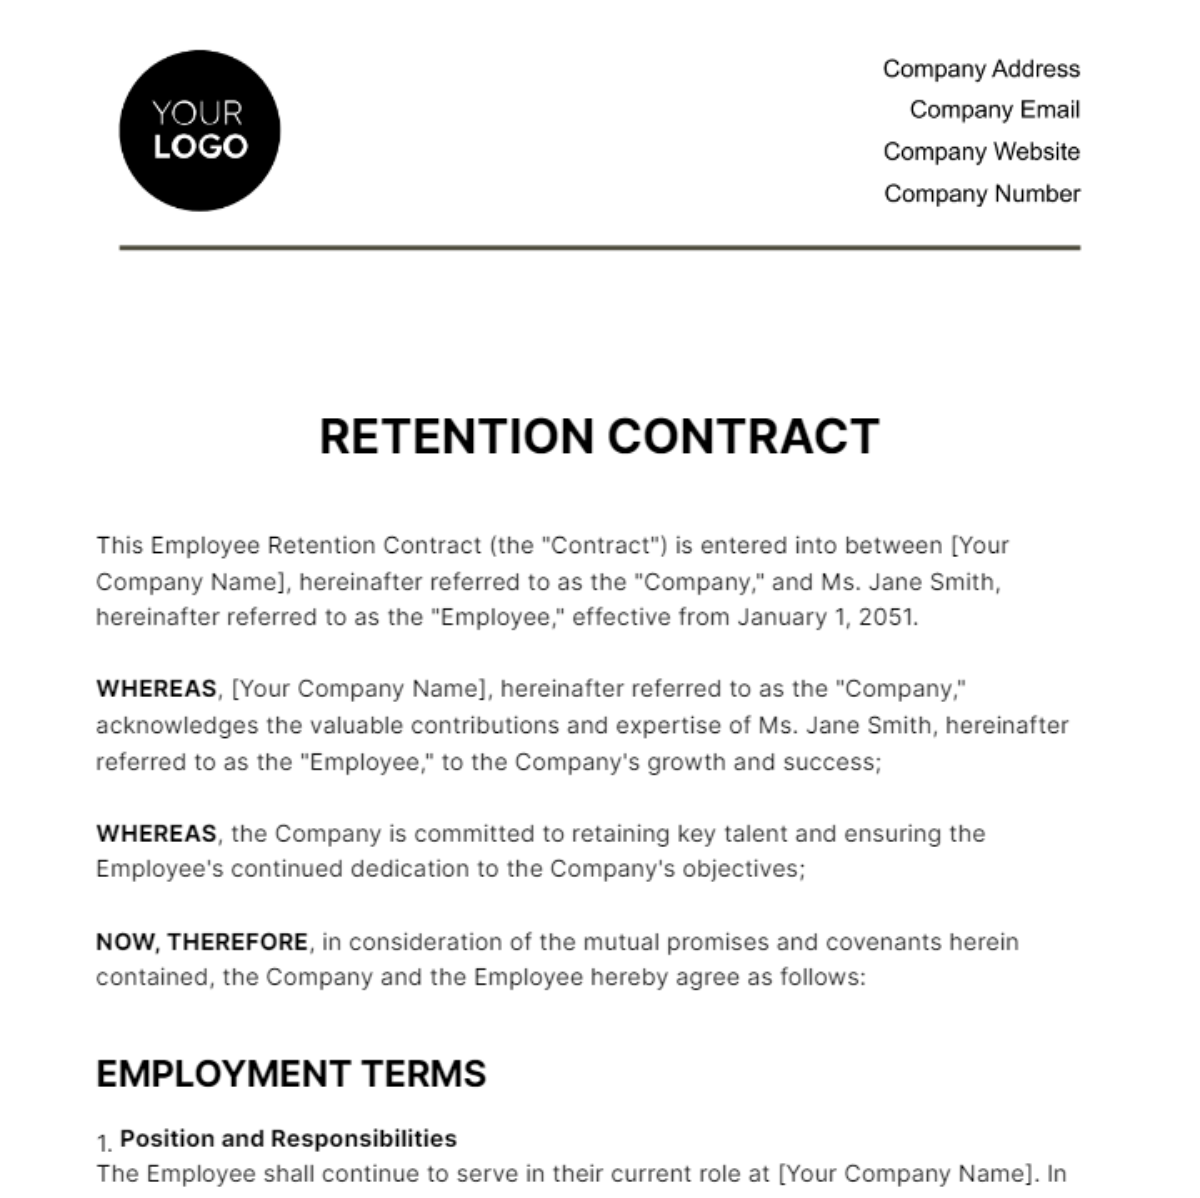 Retention Contract HR Template